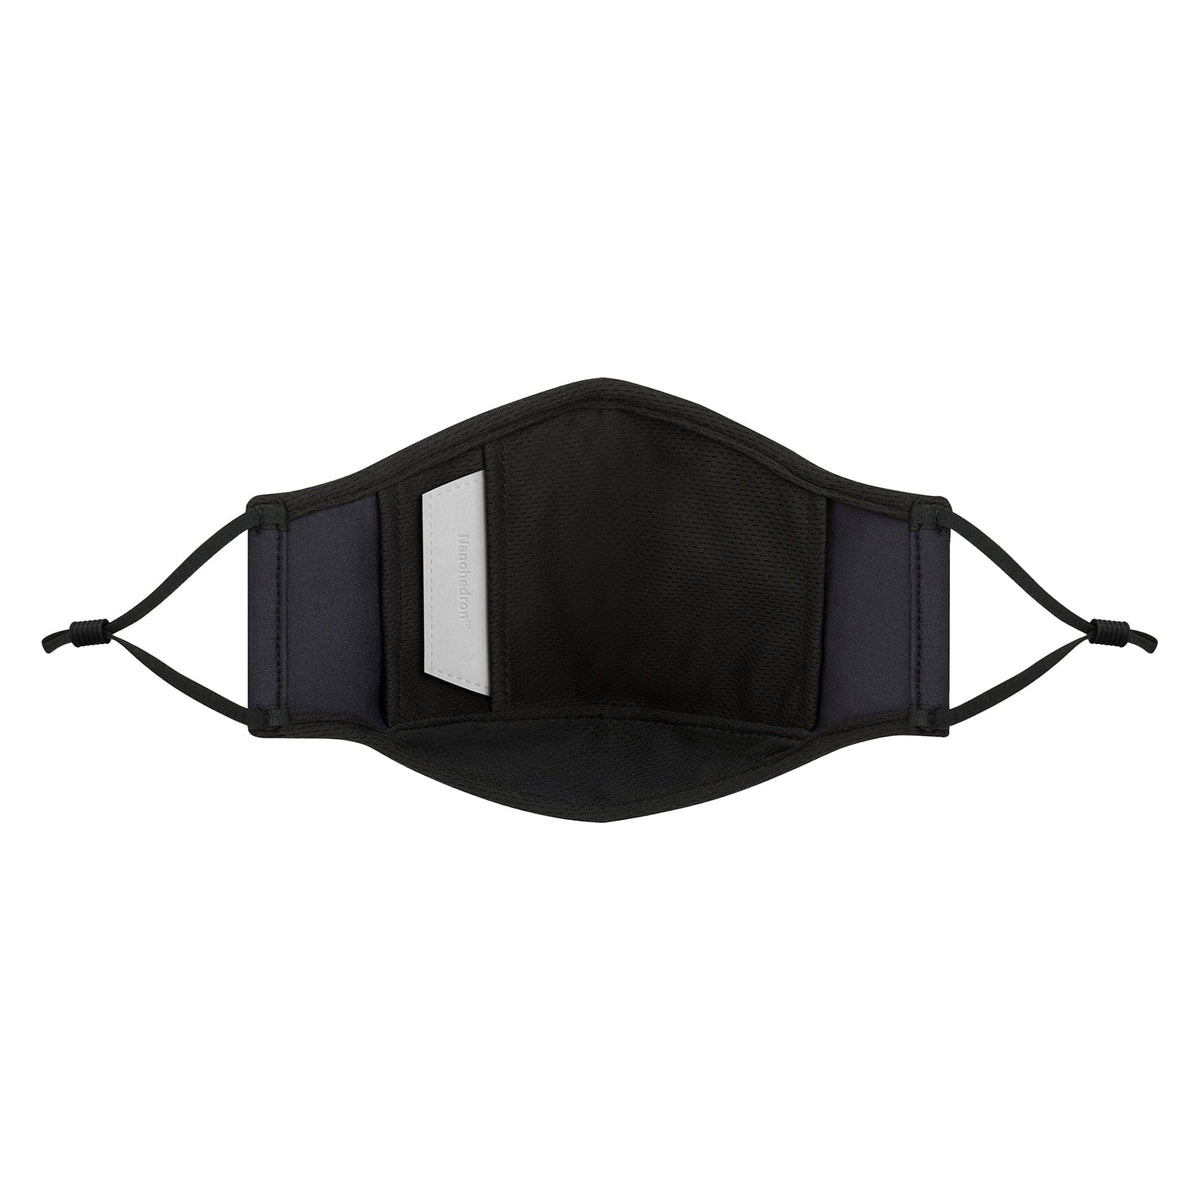 Moshi OmniGuard Large Mask with 3 Replaceable Nanohedron Filters